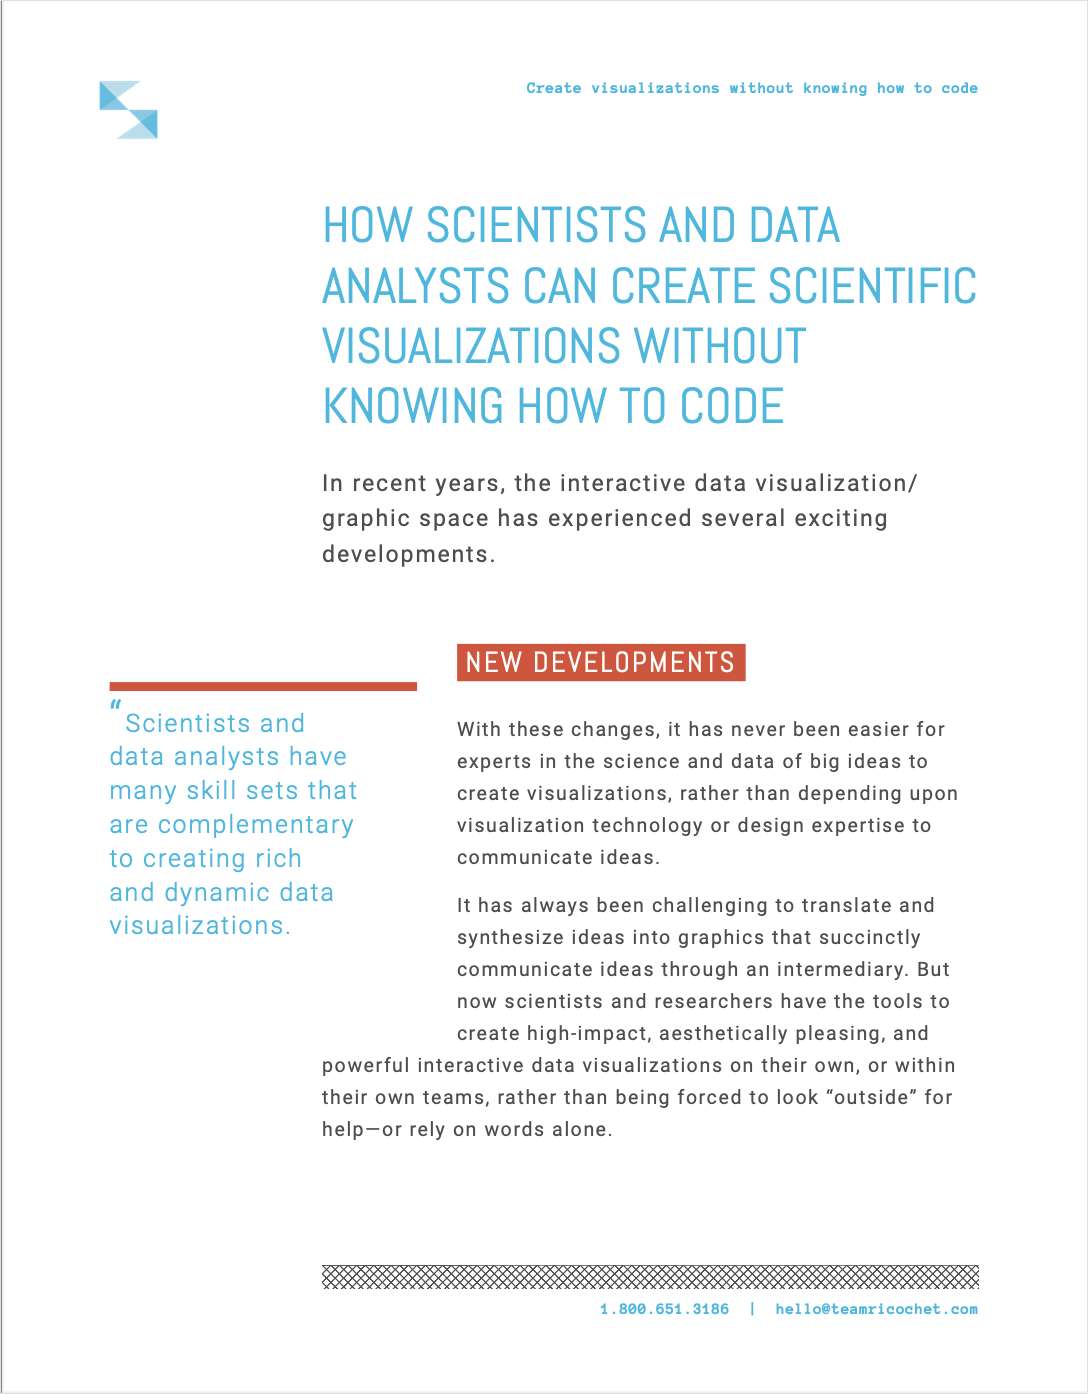 Scientific Visualizations for Scientists & Data Analysts